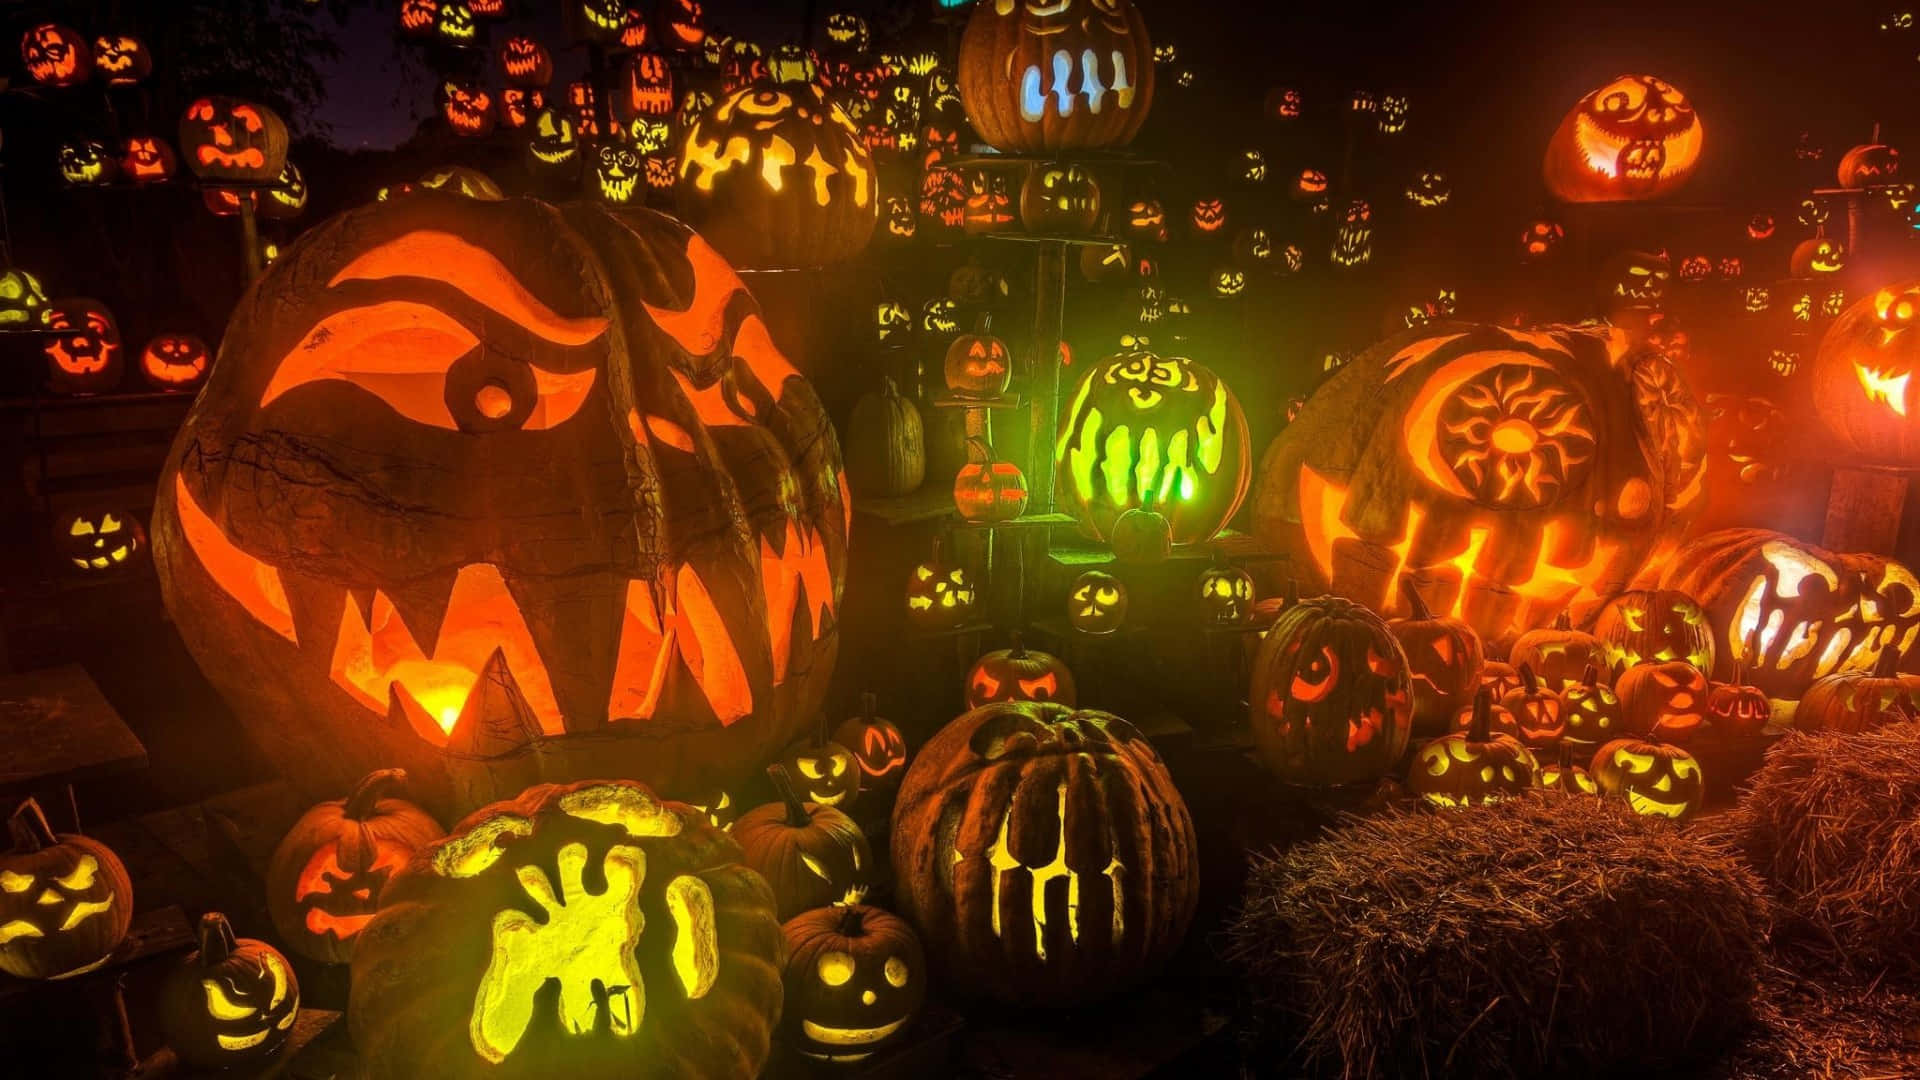 A Group Of Pumpkins With Glowing Faces Wallpaper